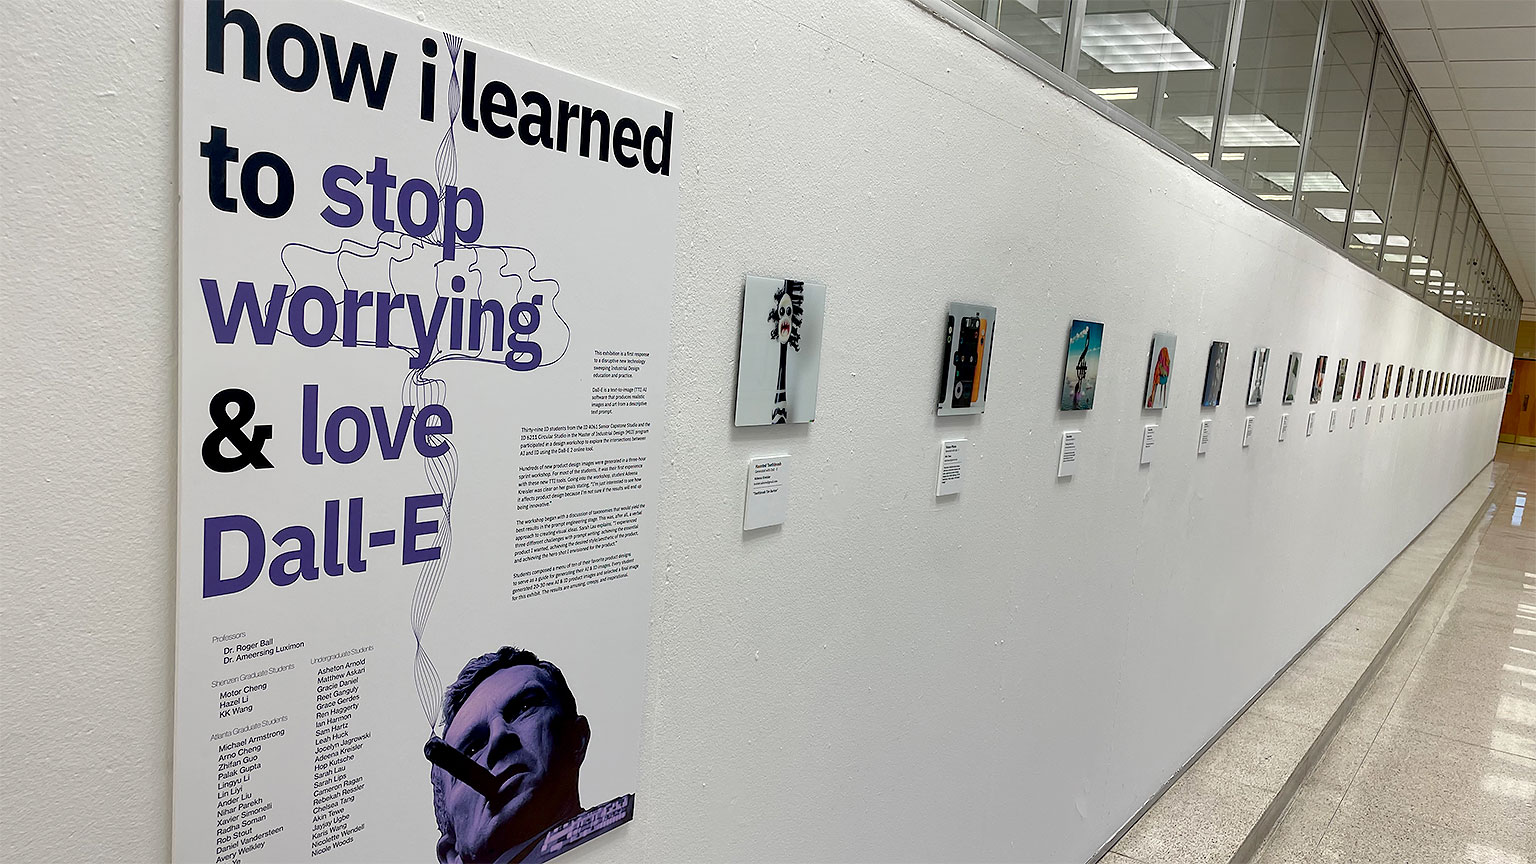 How I Learned to Stop Worrying and Love Dall-E exhibit at the College of Design.